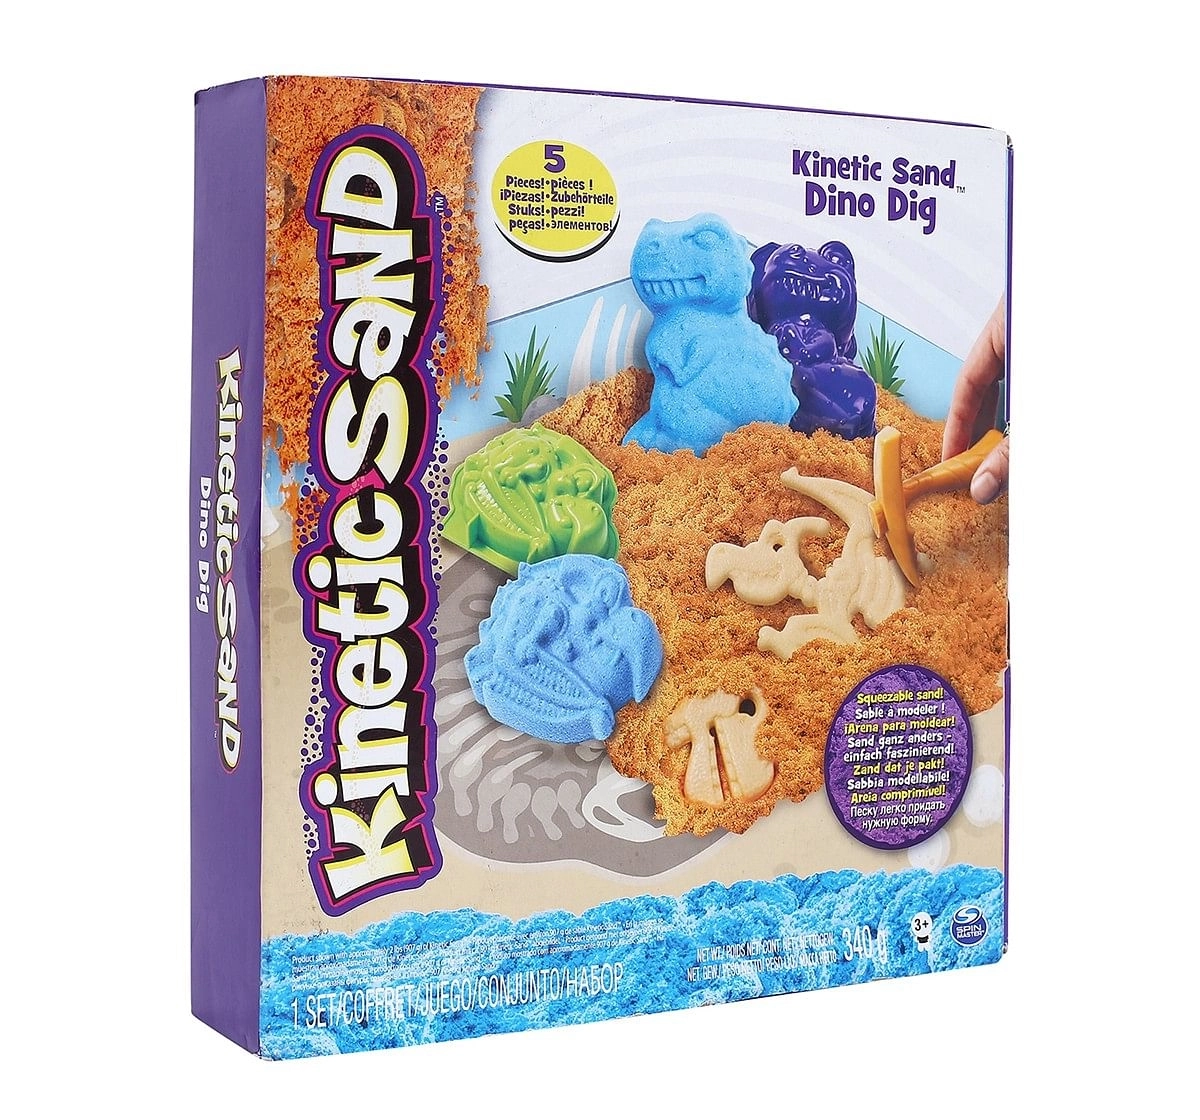 Kinetic Sand Doggy Day Care Dino Sand, Slime & Others for Kids age 3Y+ 